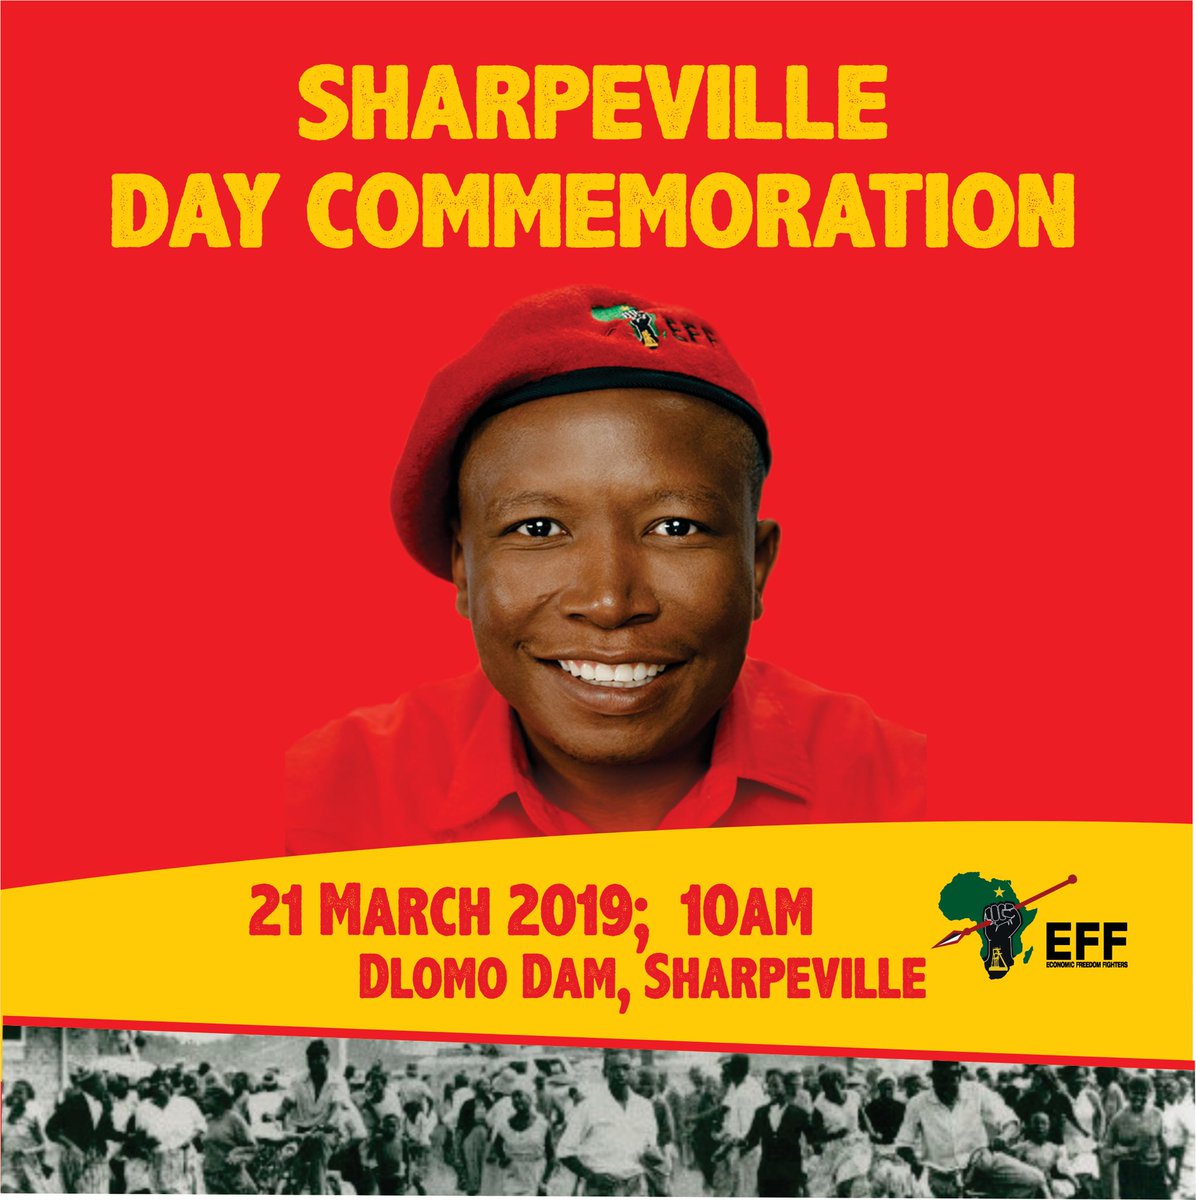 The CIC @Julius_S_Malema will address the EFF #SharpevilleDay Commemoration on 21 March 2019. 

Date: 21 March, 2019
Time: 10h00
Venue: Dlomo Dam, Sharpeville 

There is no Human Rights without the Land. Political freedom without economic freedom is futile. 

#OurLandAndJobsNow